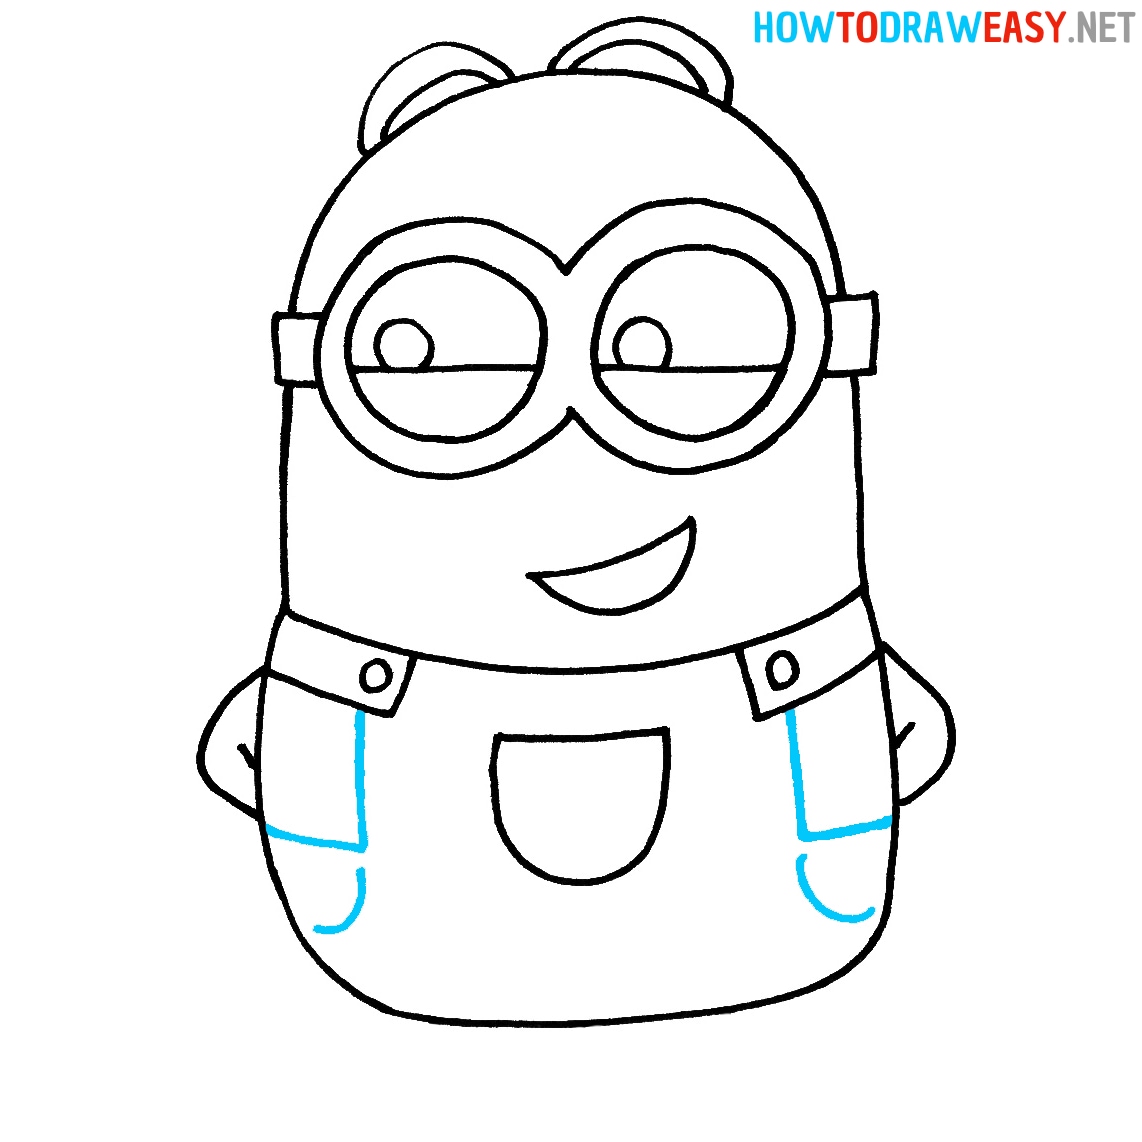 How to Draw Easy Minion